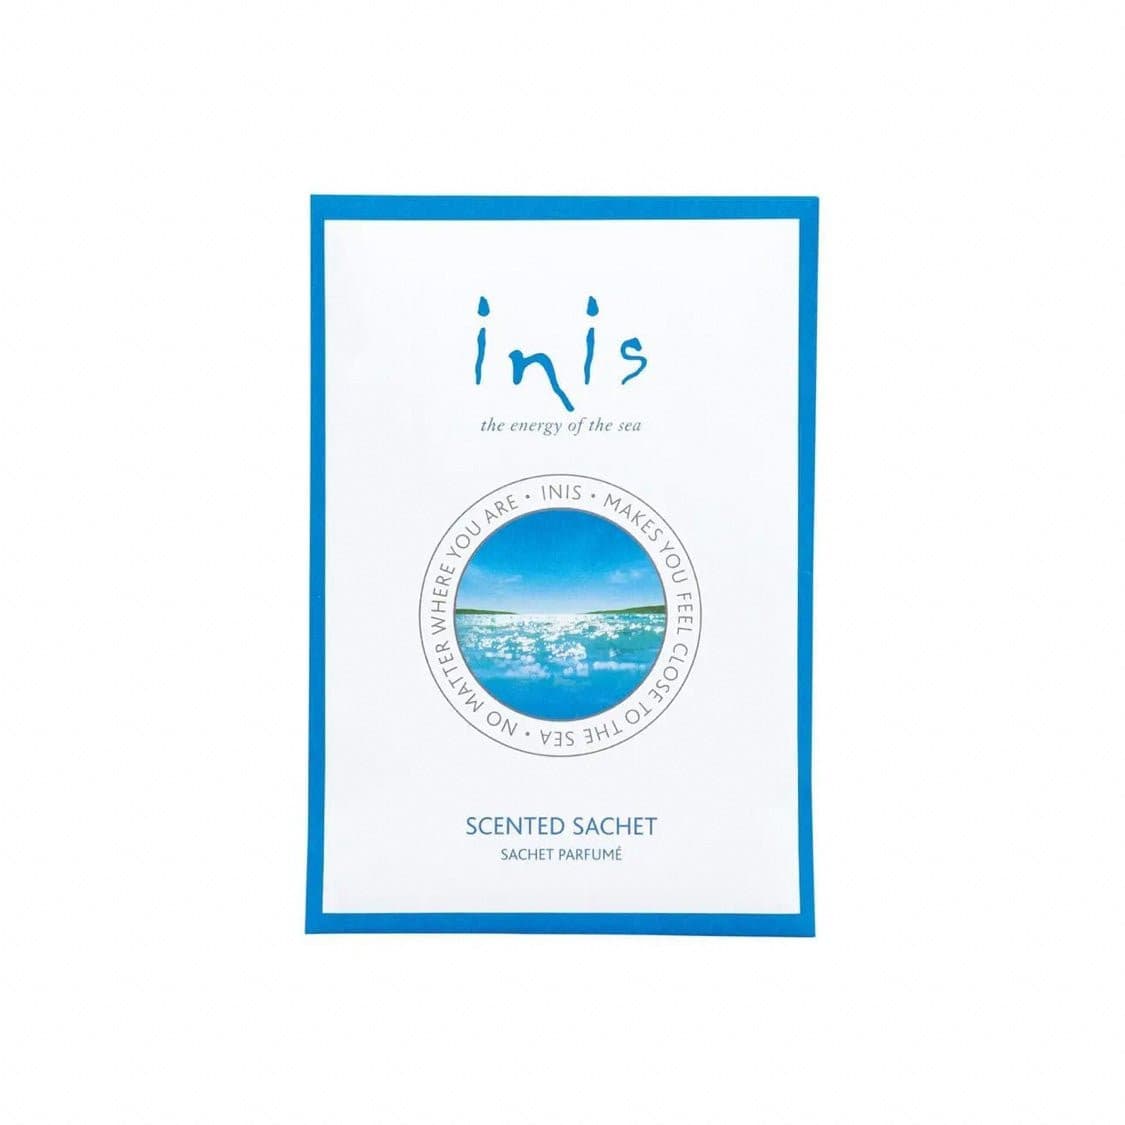 Scented Sachet from Inis